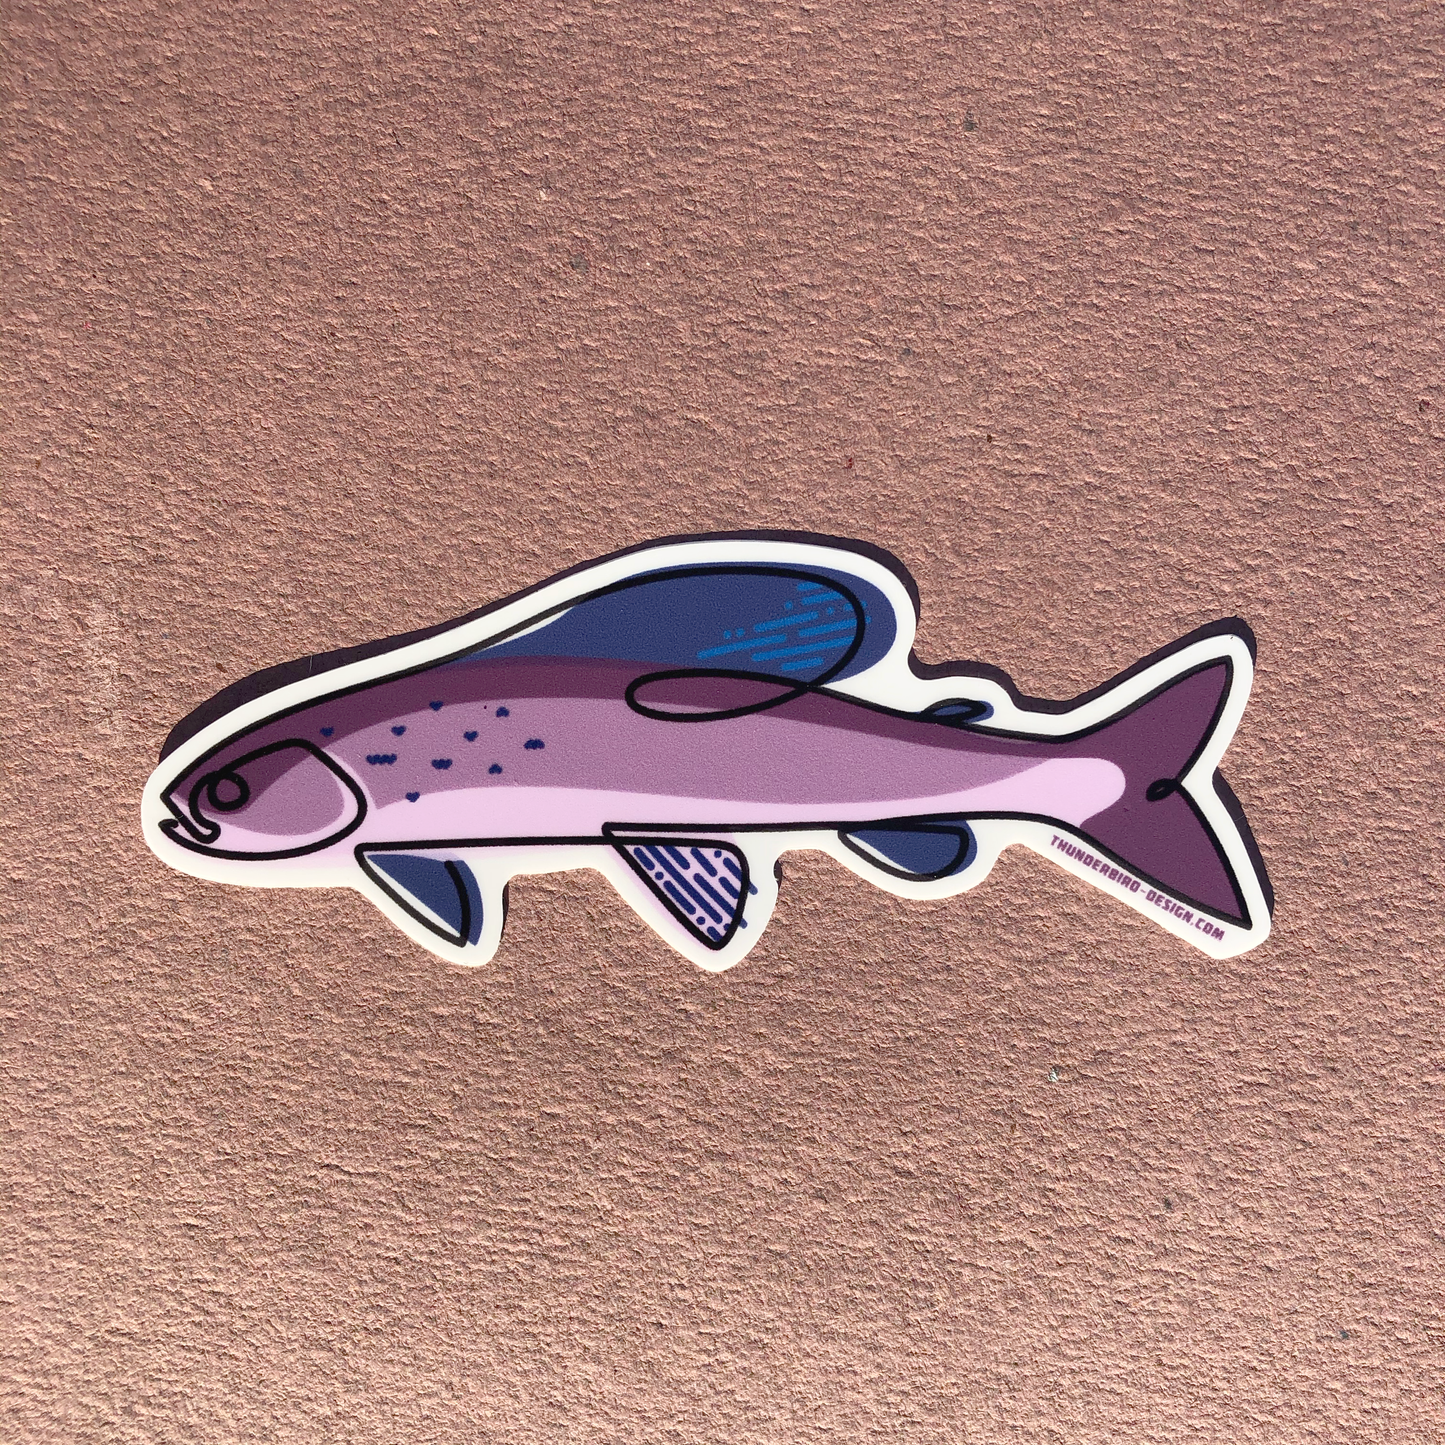 Thunderbird Outdoor SupplyGrayling - Single Line Series Decal w/Matte FinishGrayling - Single Line Series Decal
4" Drawn, Single Line Grayling Illustration.These weatherproof Matte decals are perfect for your Rod tube, water bottle, tackle box, car window or whatever else you